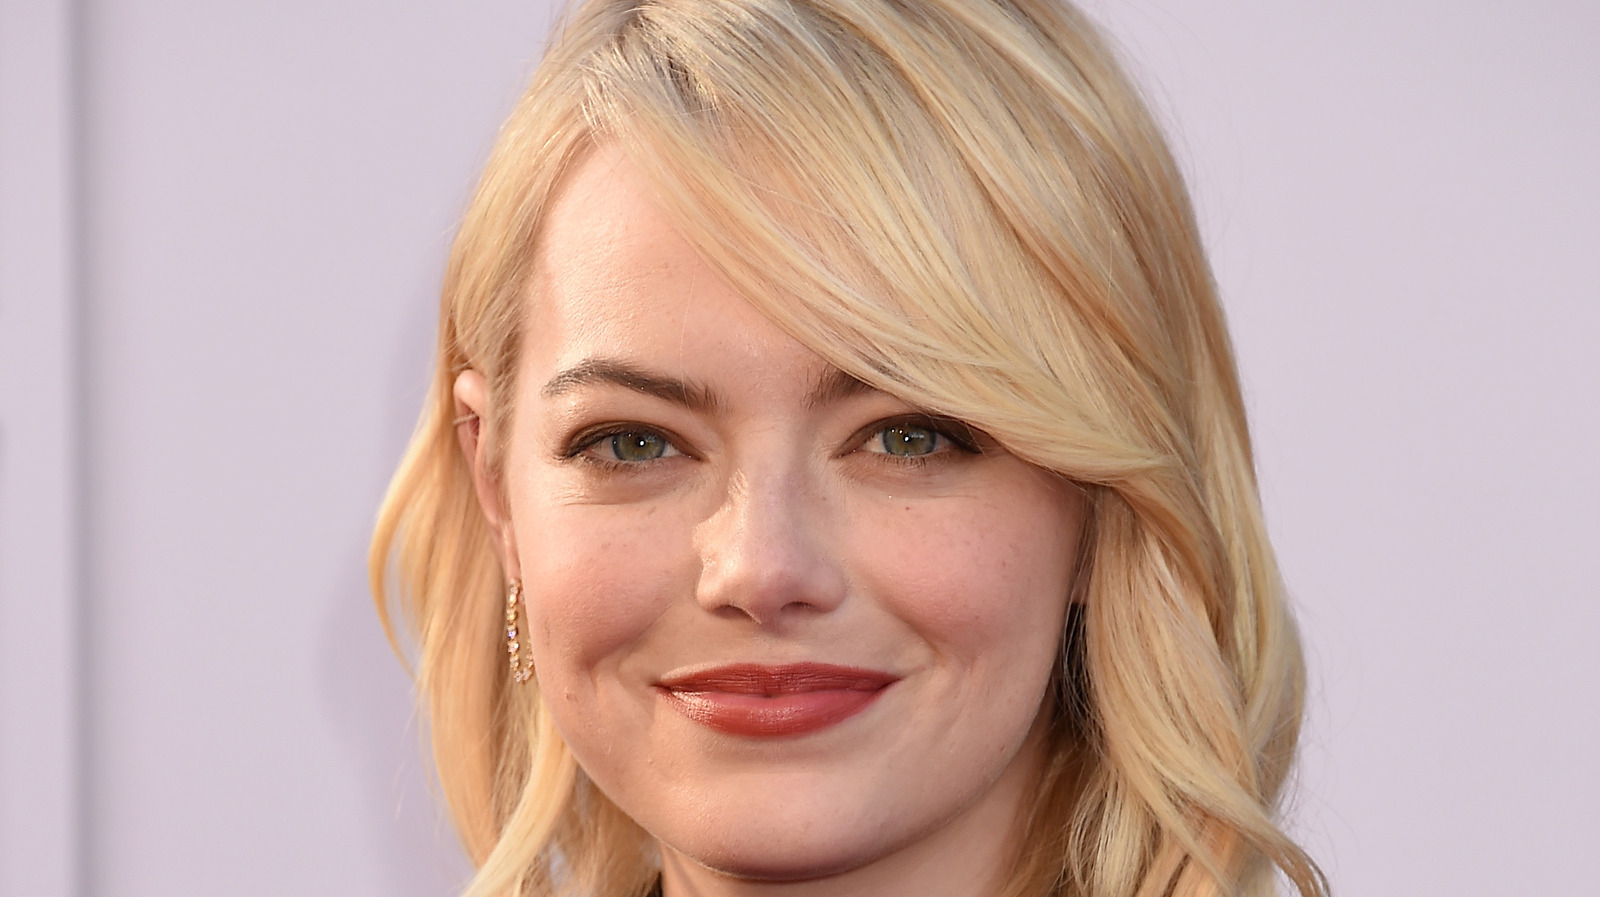 Emma Stone's Strawberry Blonde Look That Fans Envy